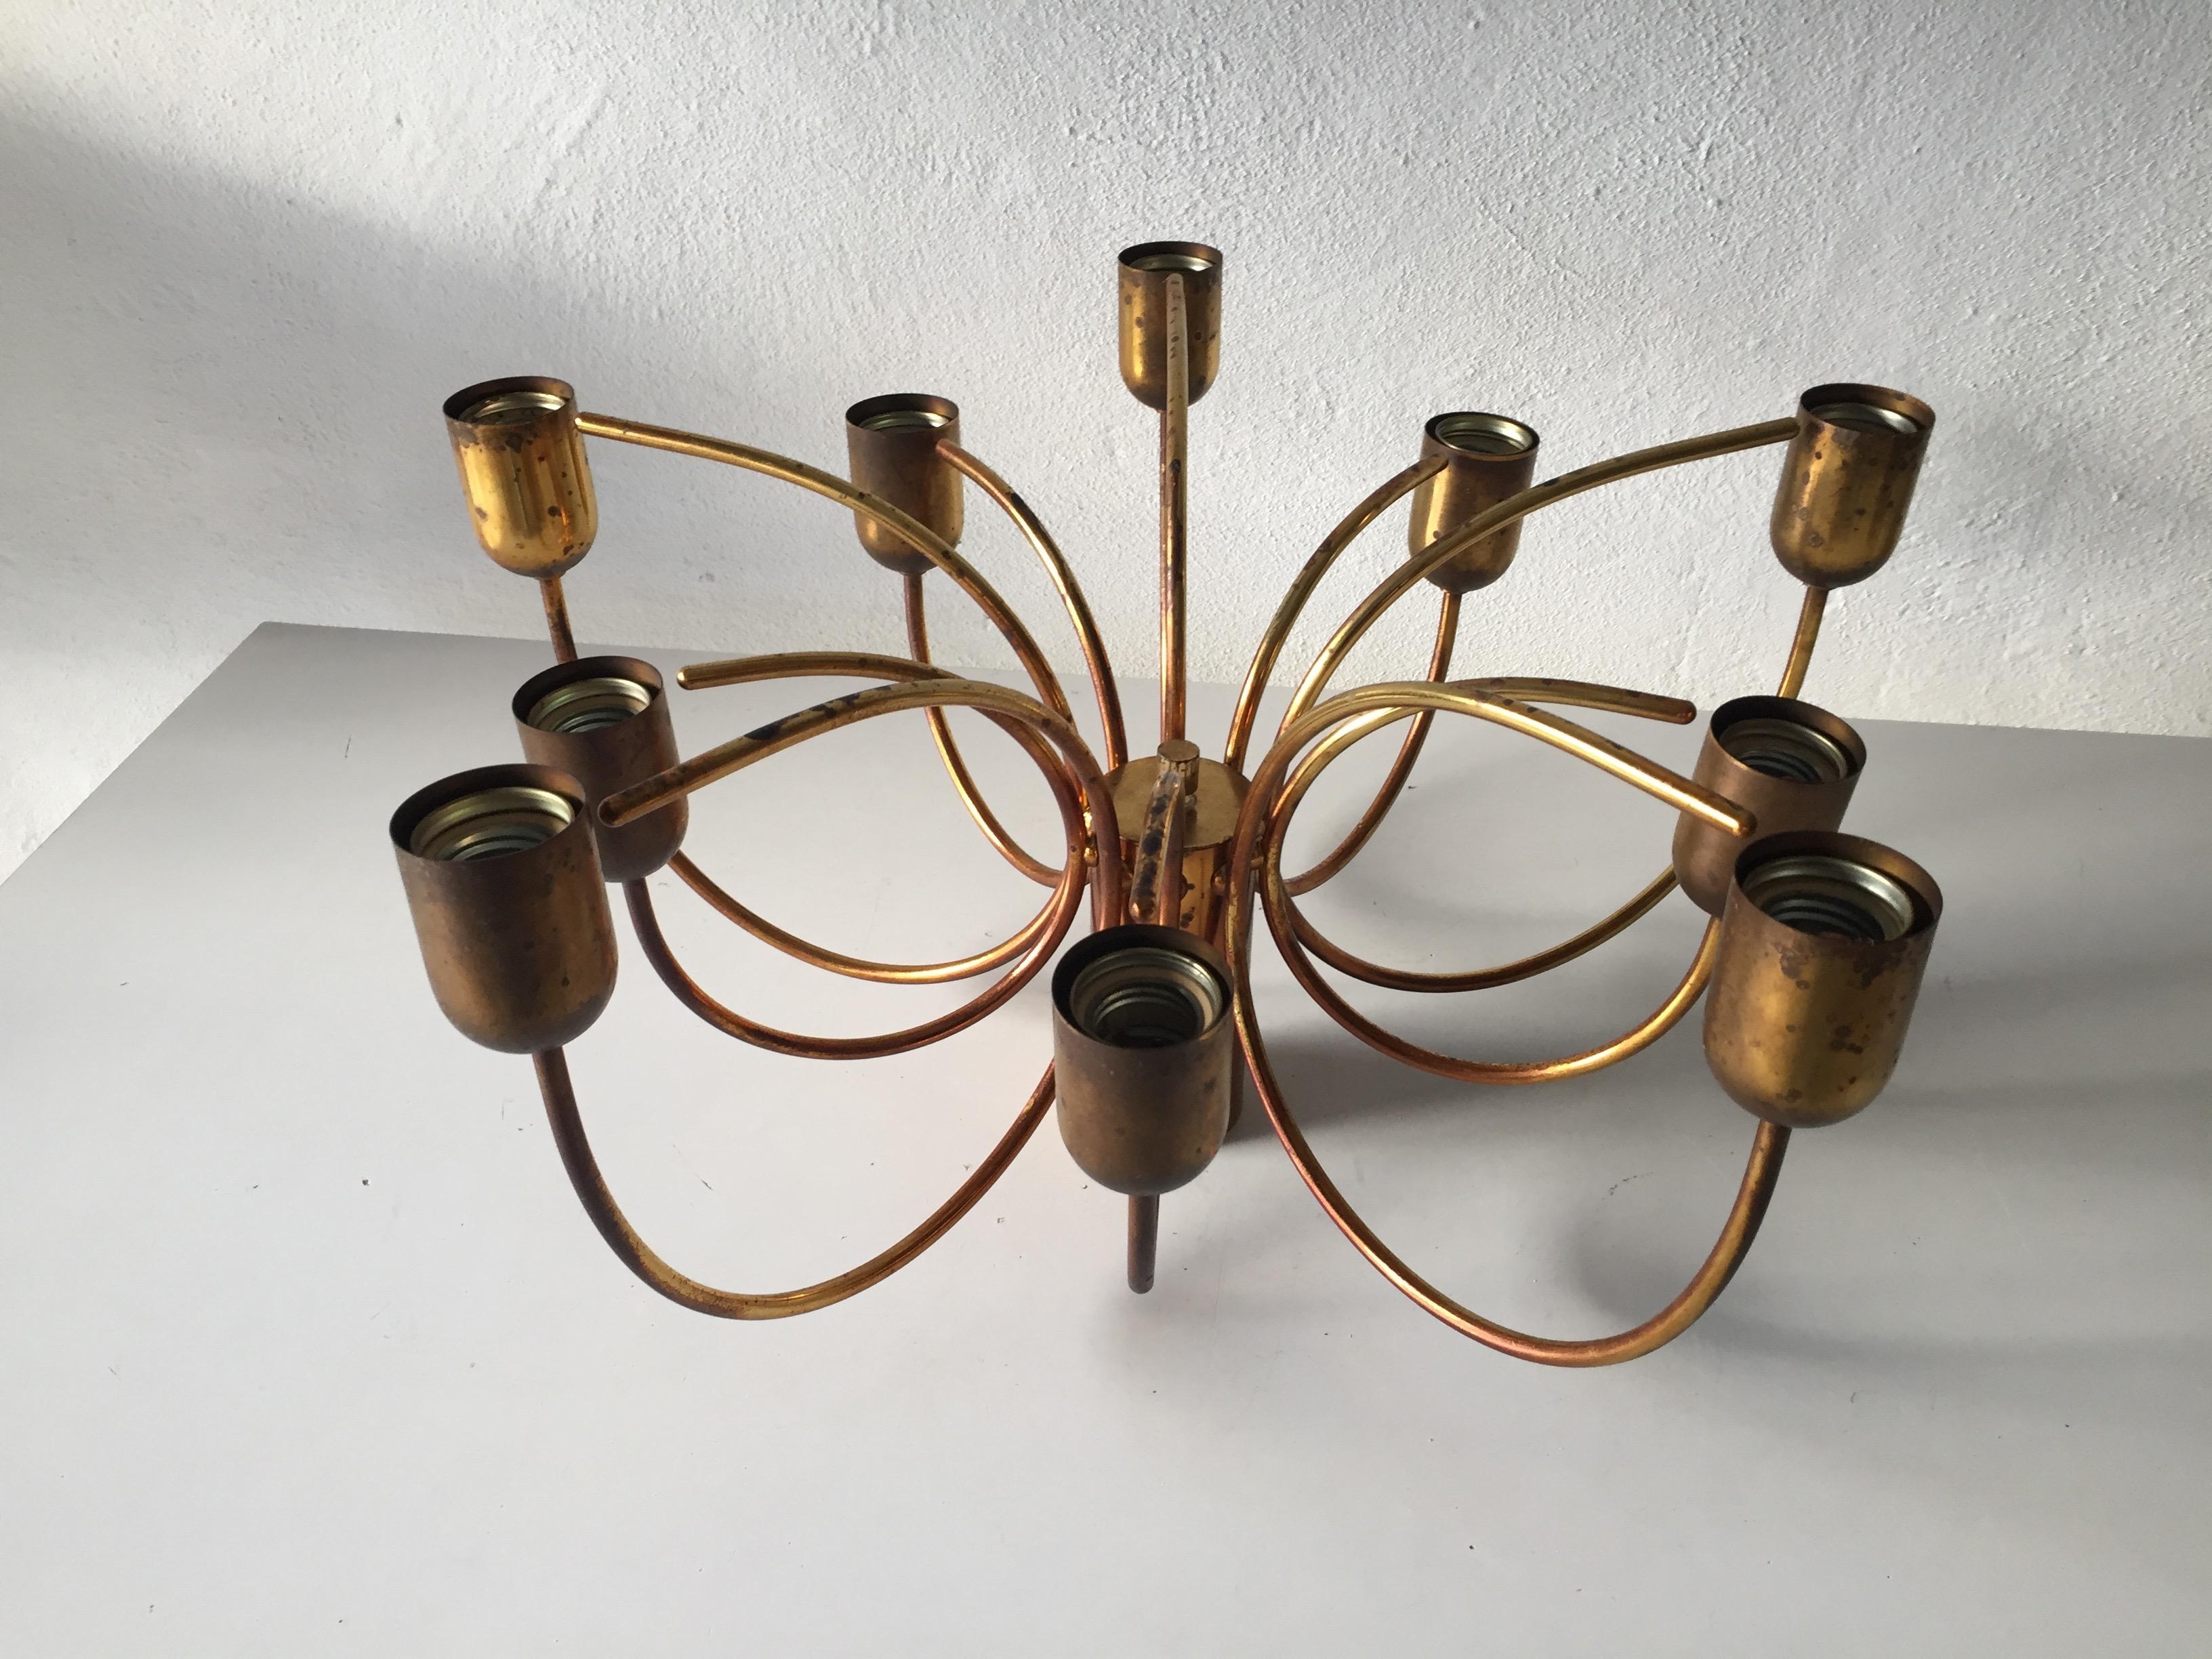 Rare 10 Arc Shaped Arms Full Brass Chandelier by Cosack Leuchten, 1970s Germany For Sale 2